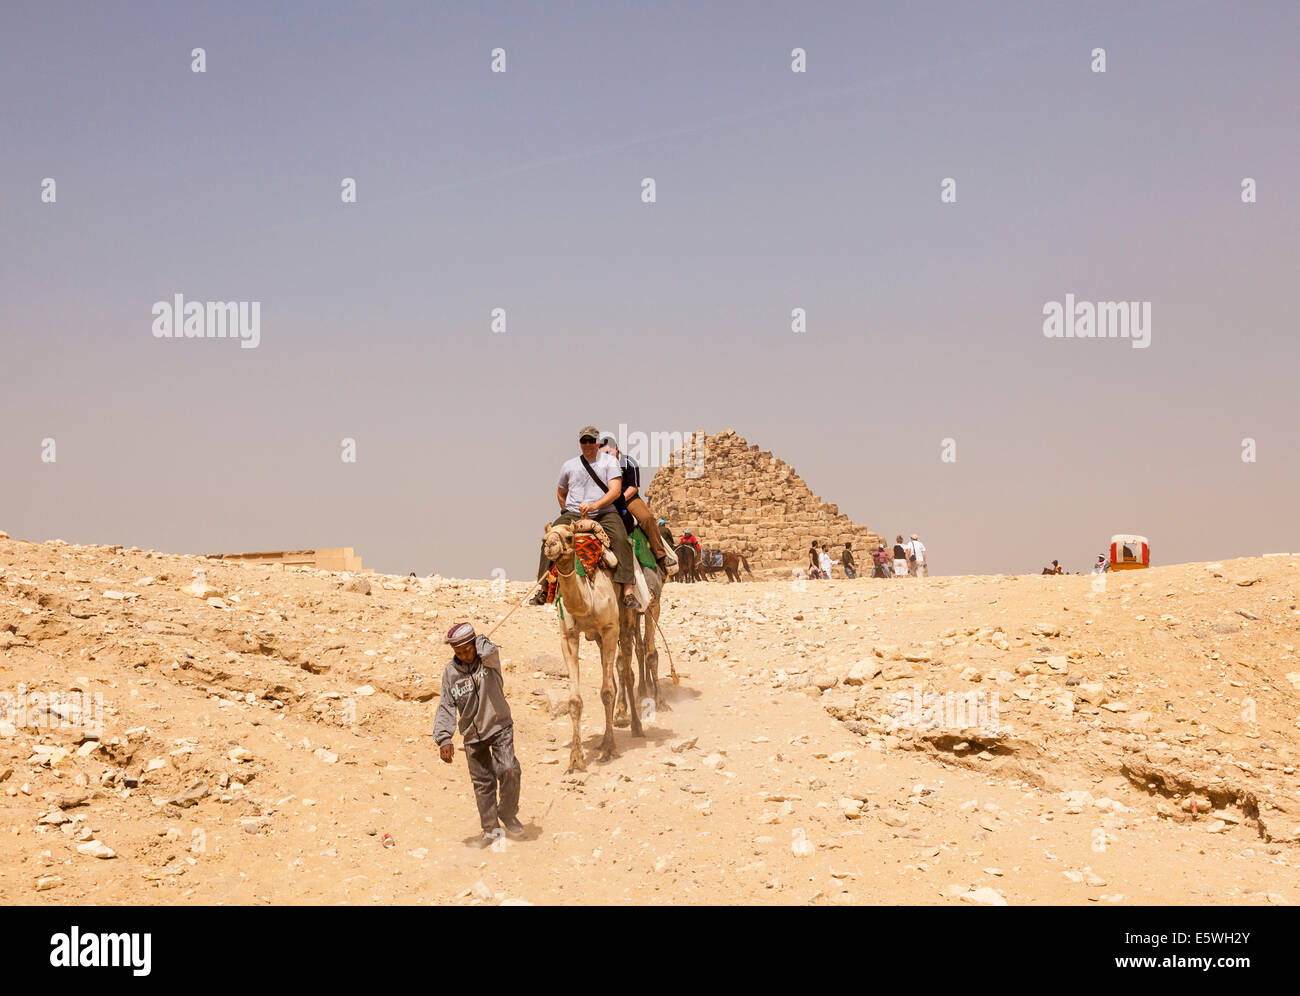 Pyramids, Egypt - Tourist riding a camel  by the Great Pyramid of Giza in Cairo, Egypt Stock Photo